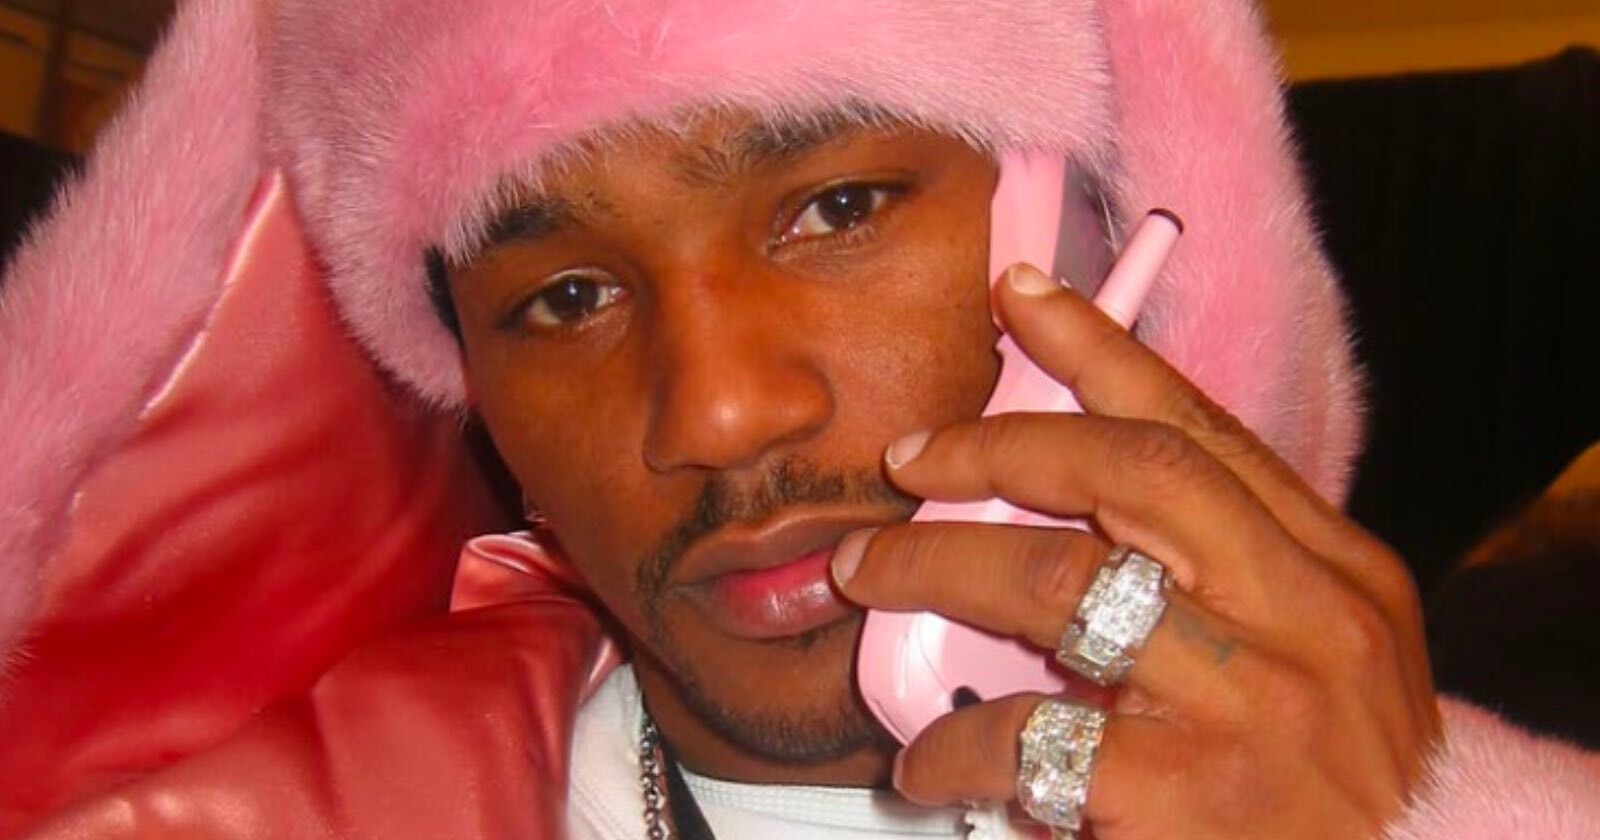 Rapper Camron Must Pay $50k for Using Iconic Photo of Himself Without Permission